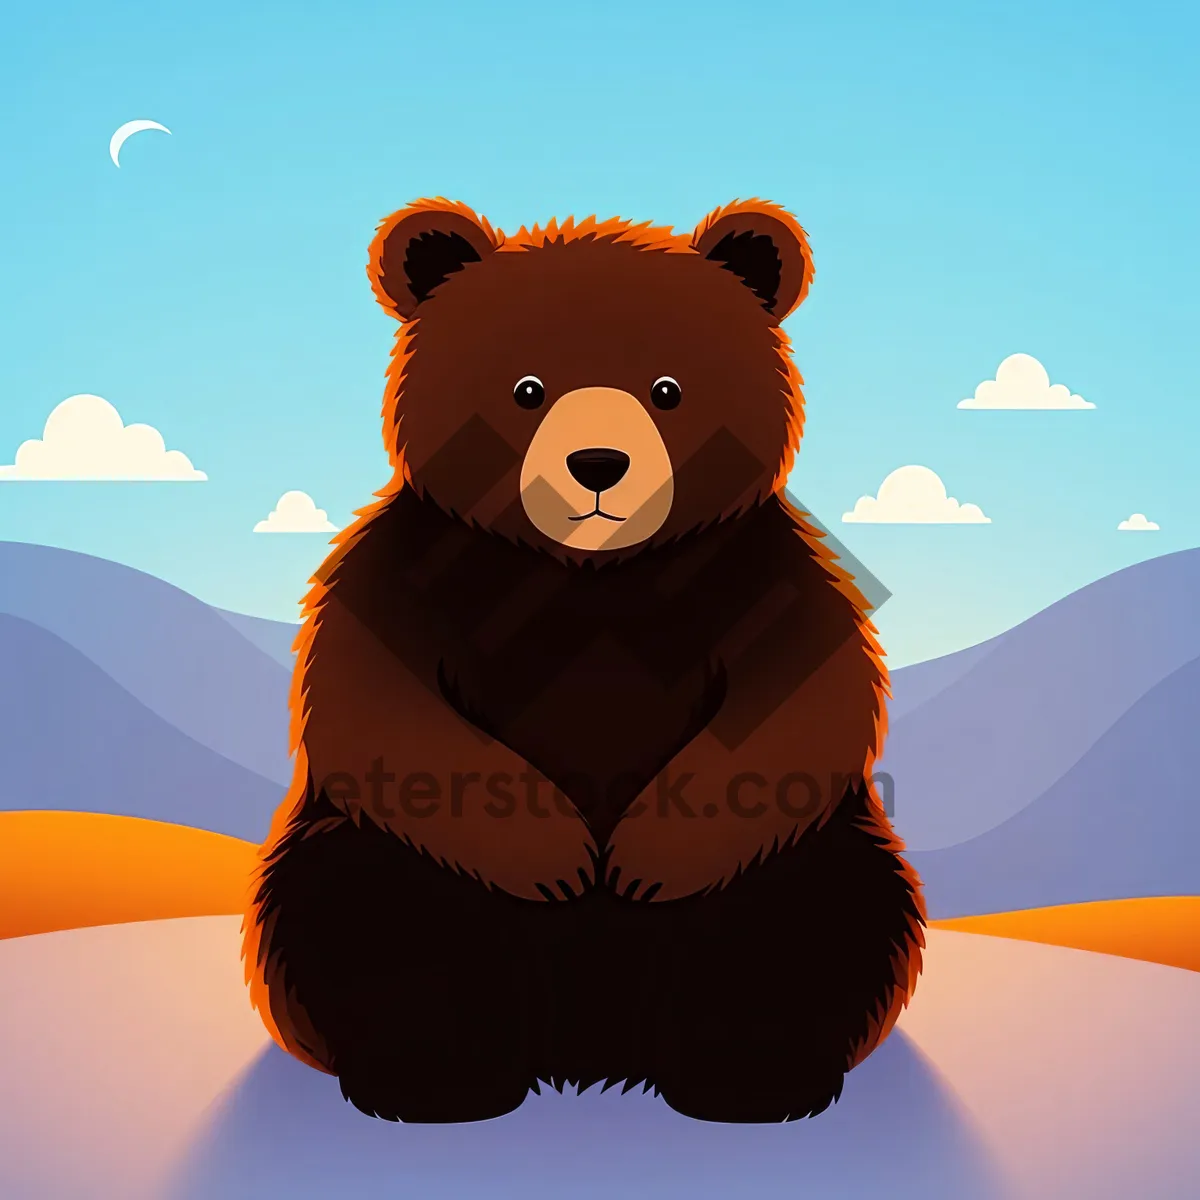 Picture of Fluffy Little Teddy Bear - Cute Toy for Love and Fun